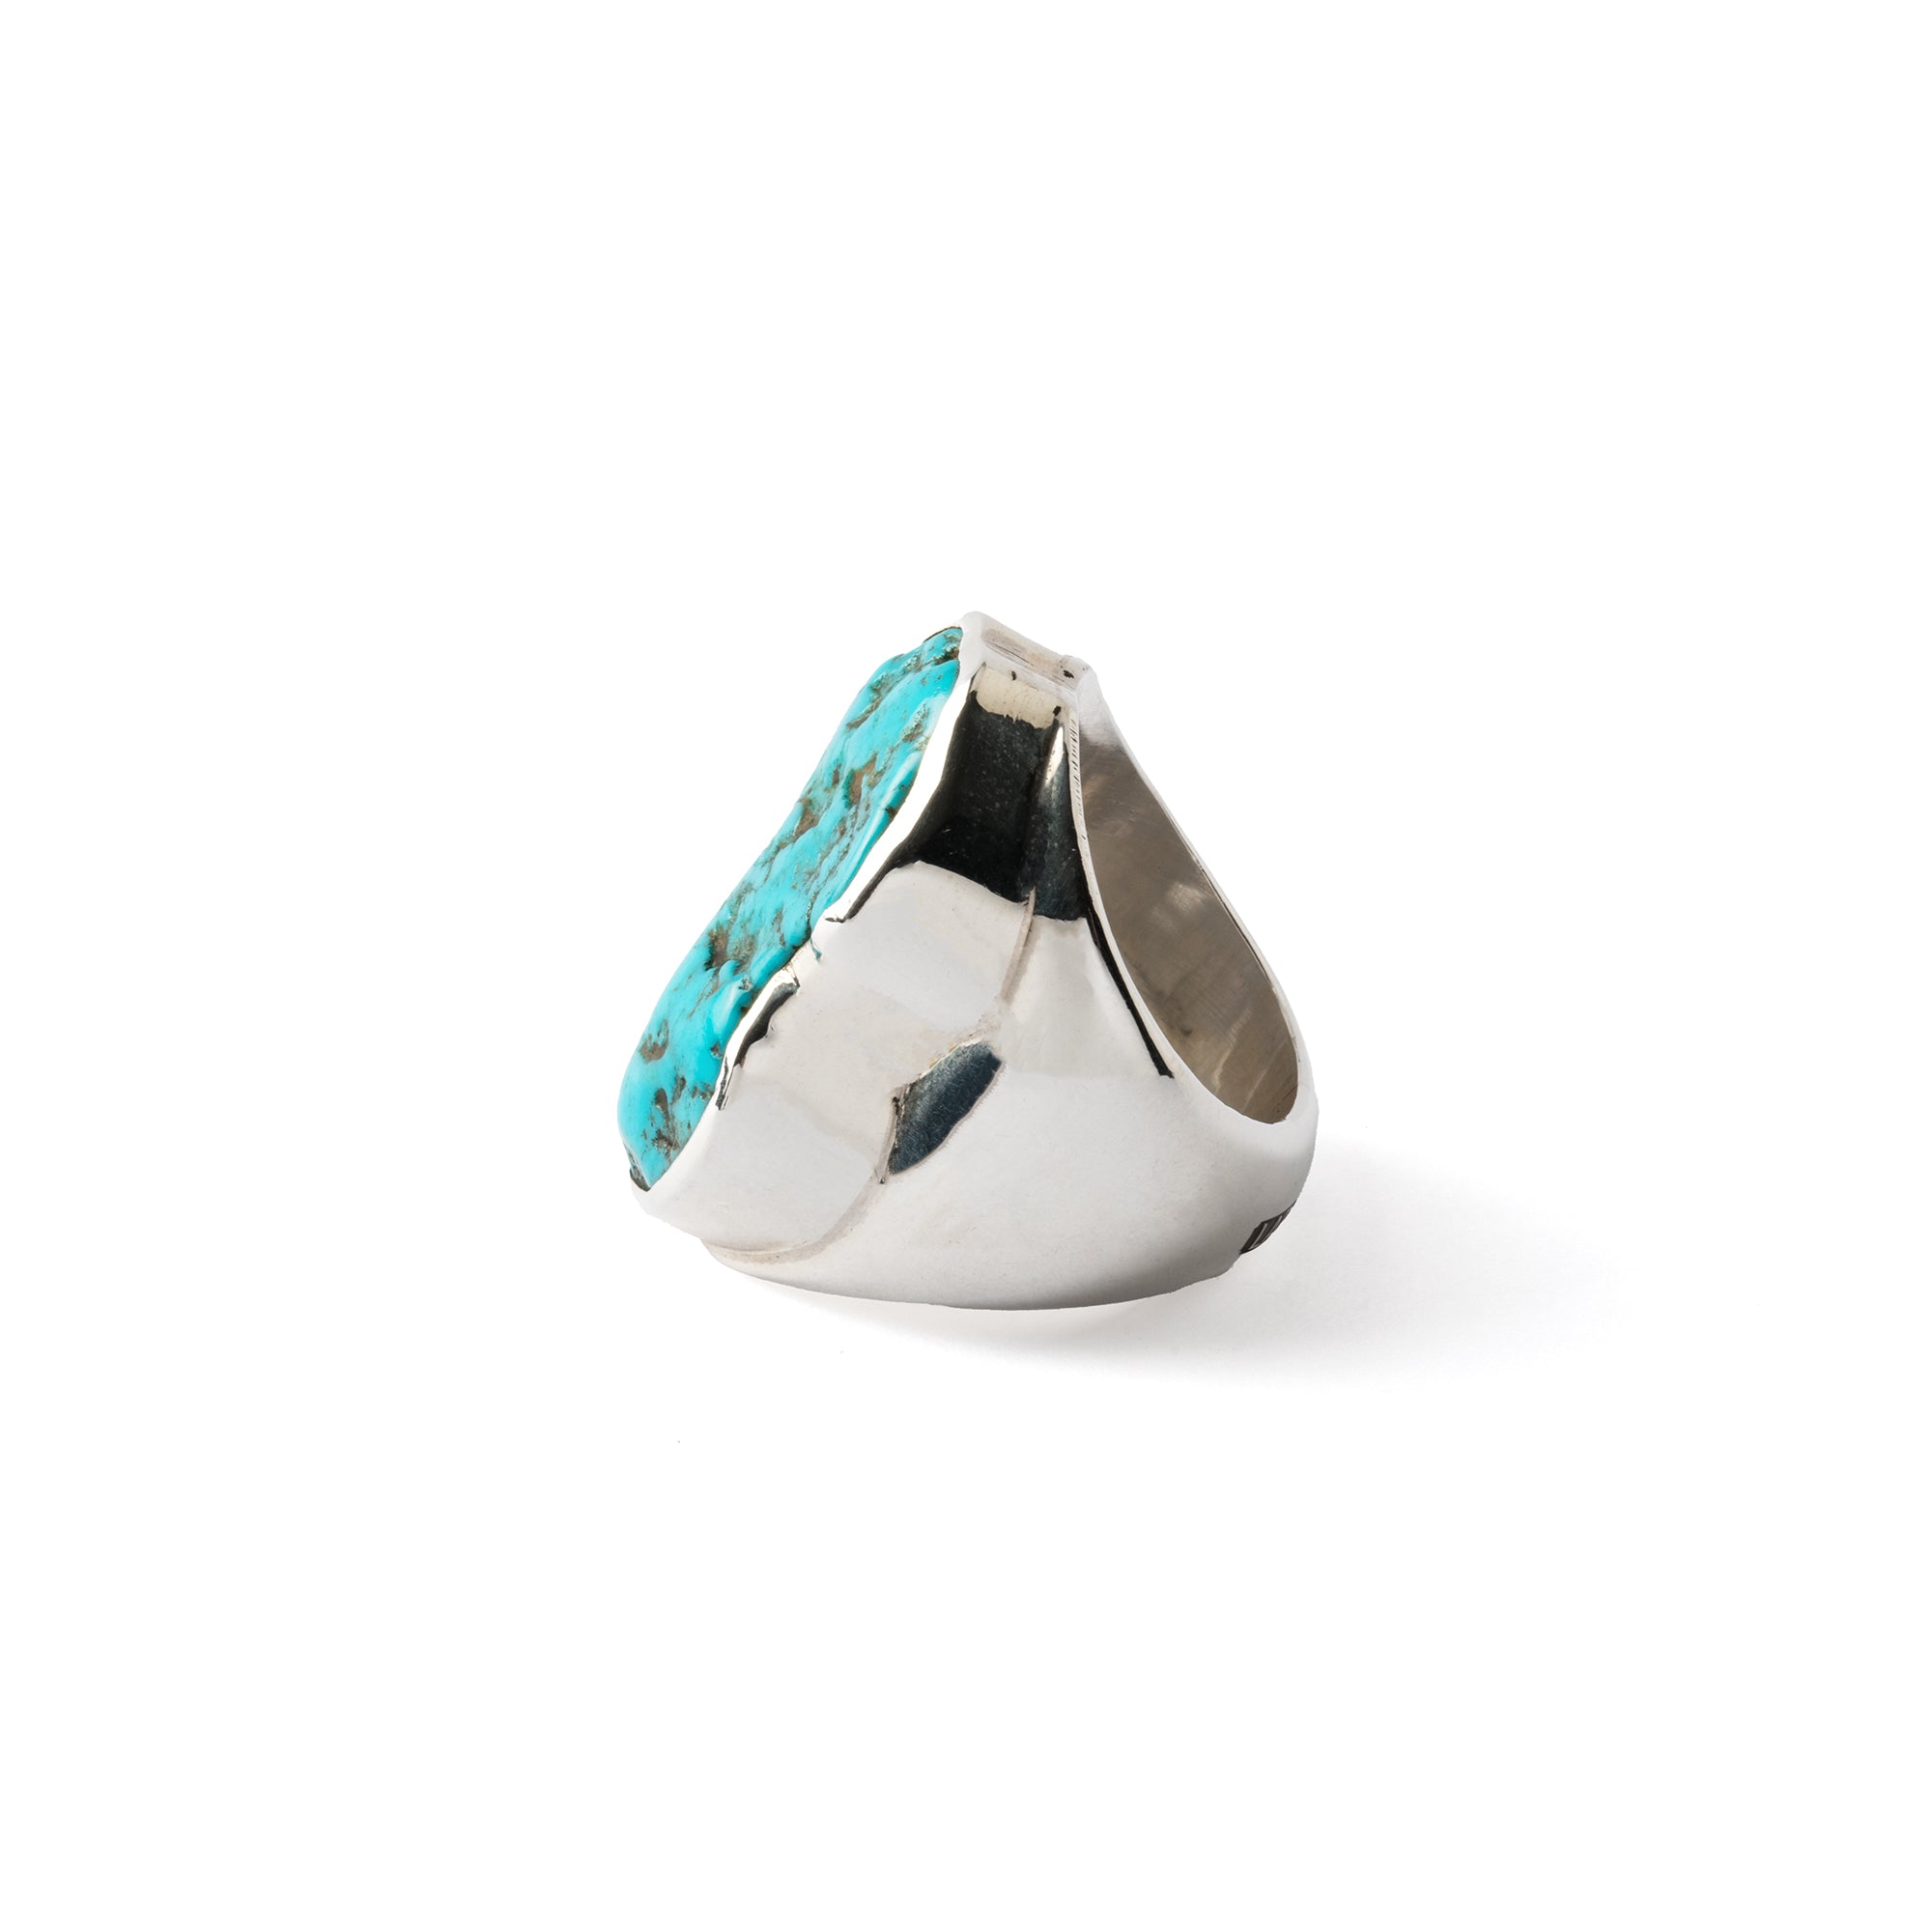 Hallmarked Silver Ring with American Turquoise